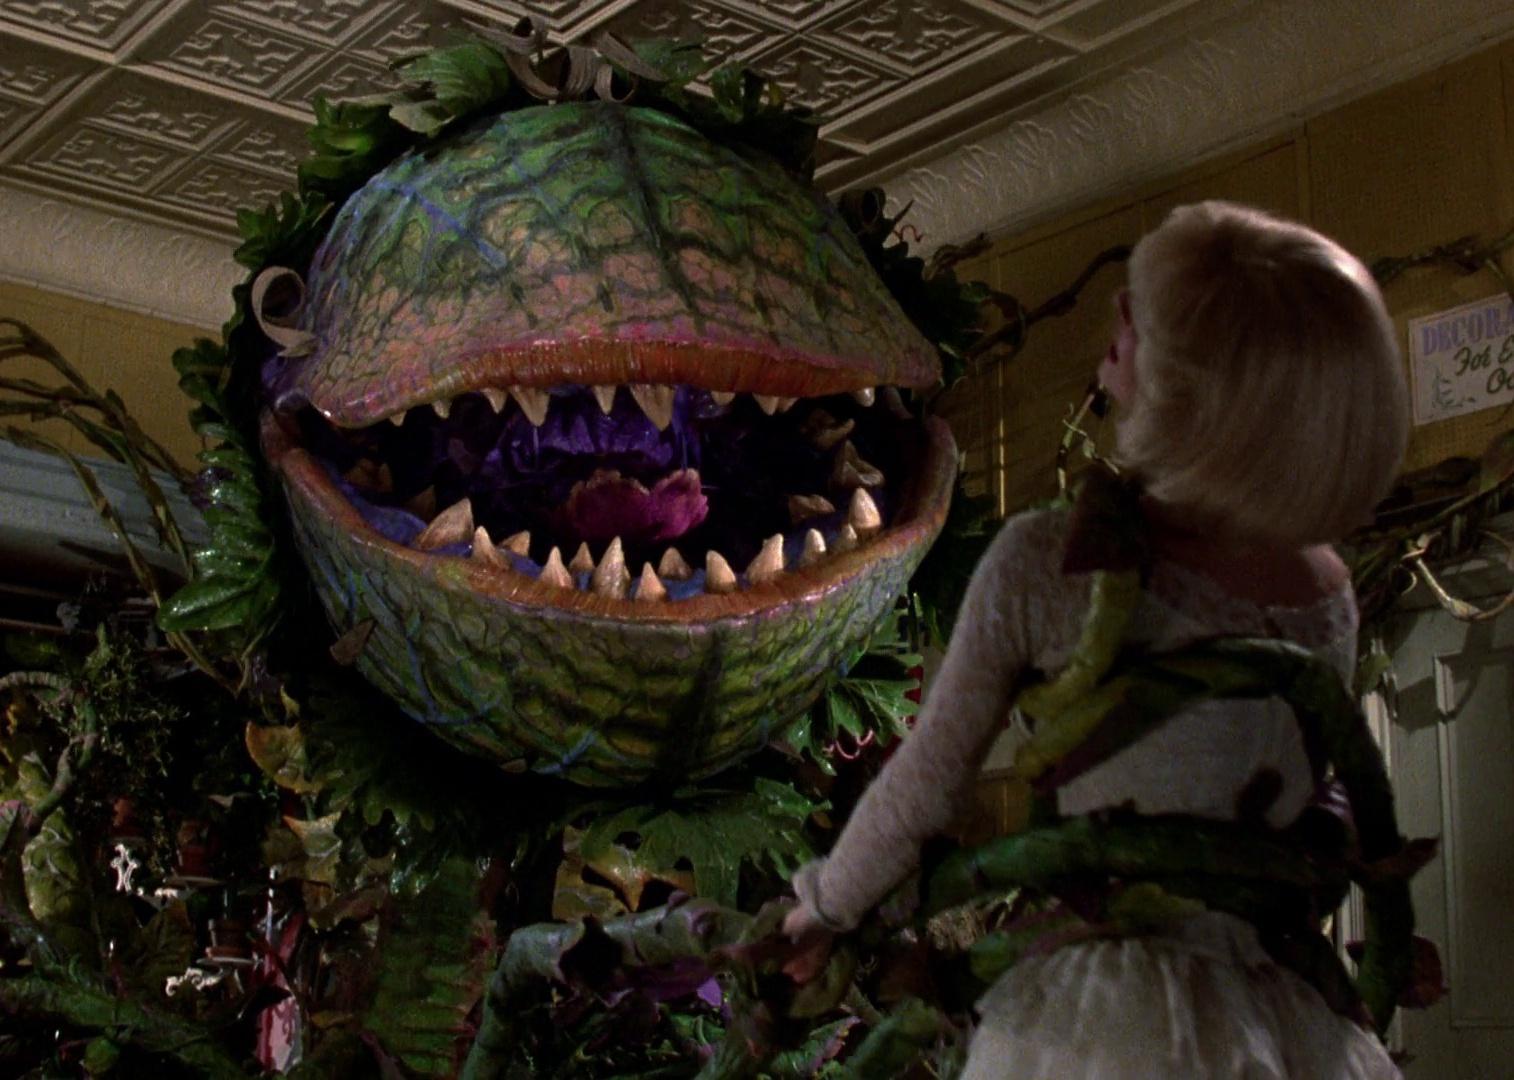 A giant Venus fly trap holds a woman in it